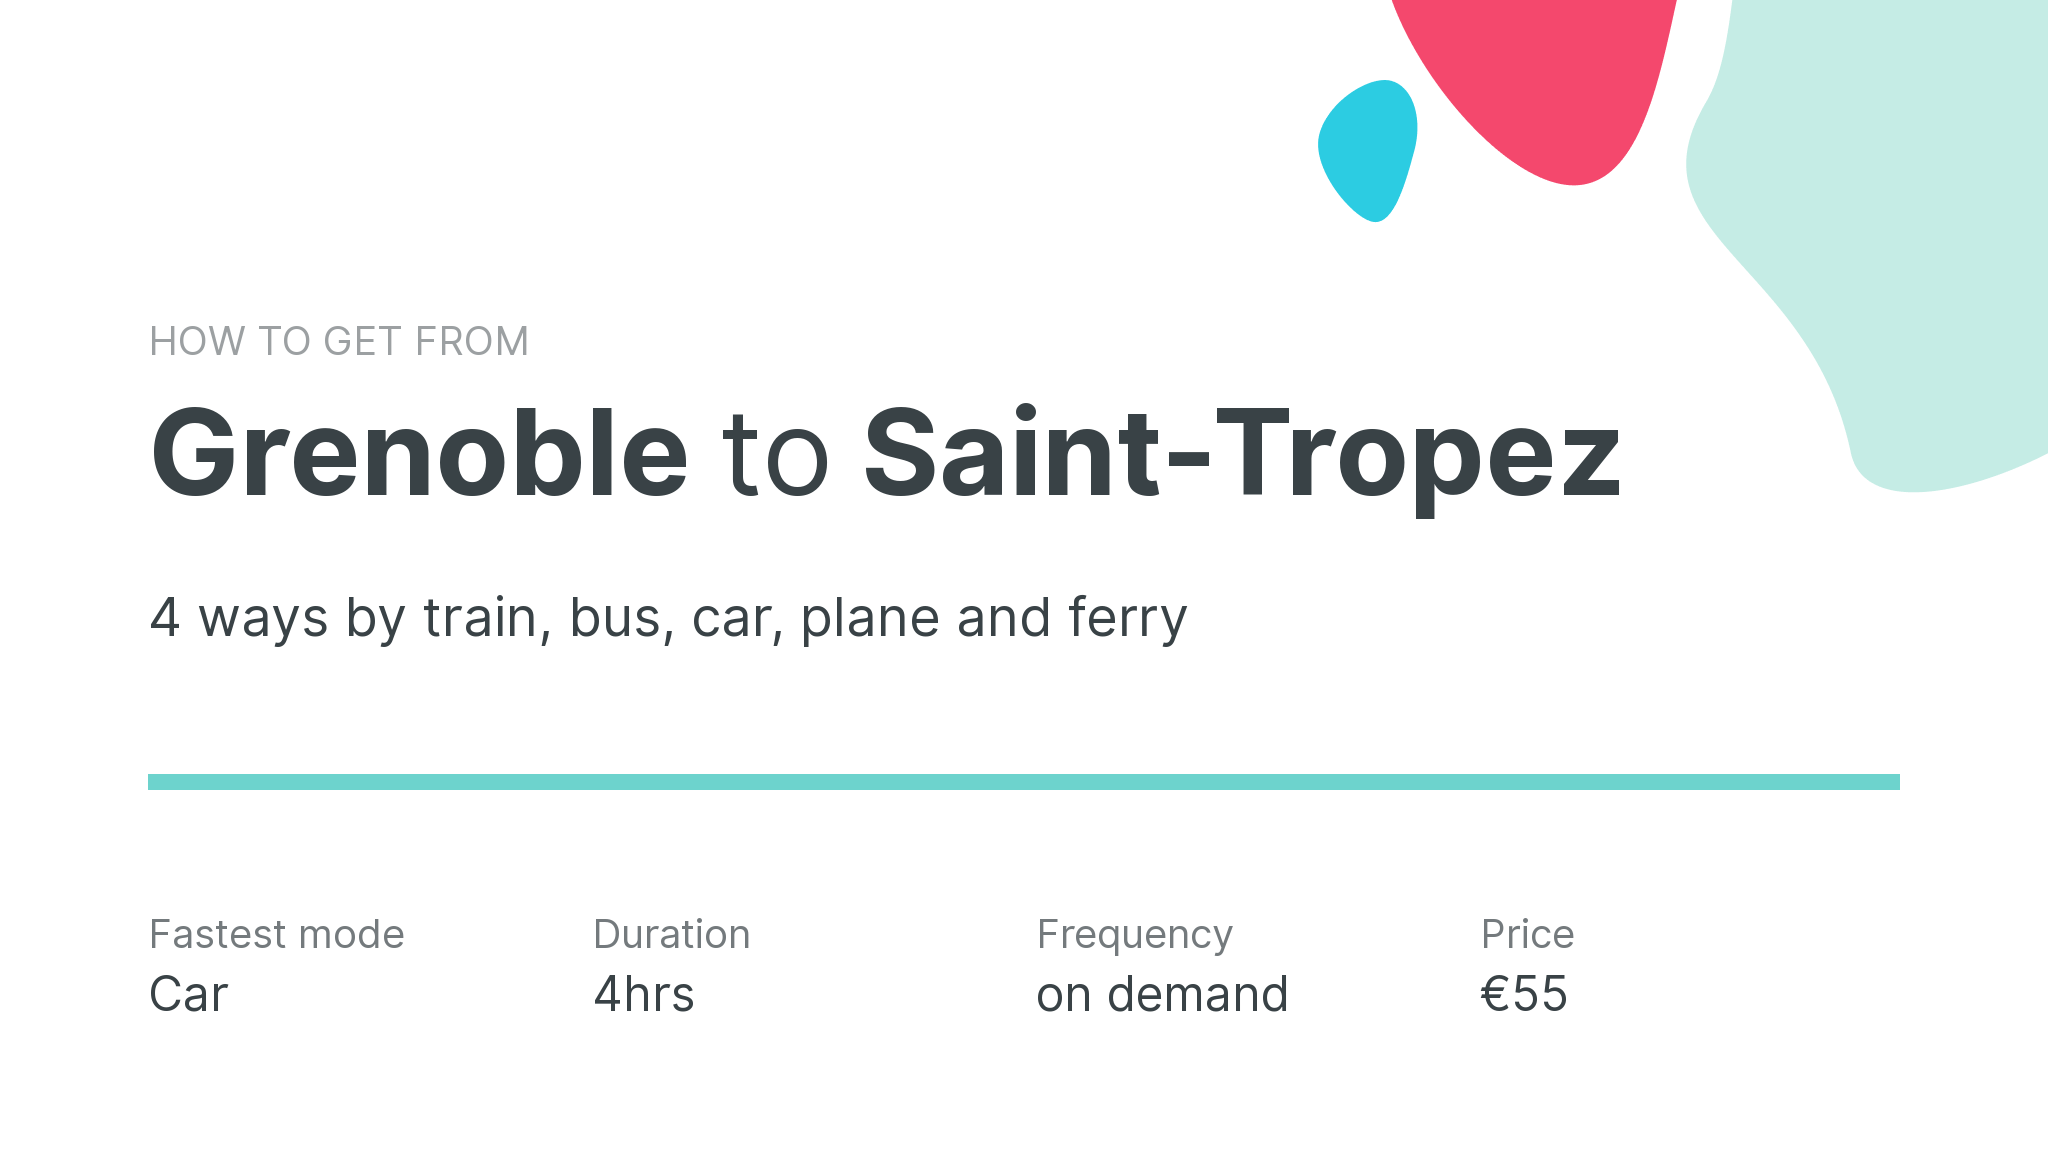 How do I get from Grenoble to Saint-Tropez